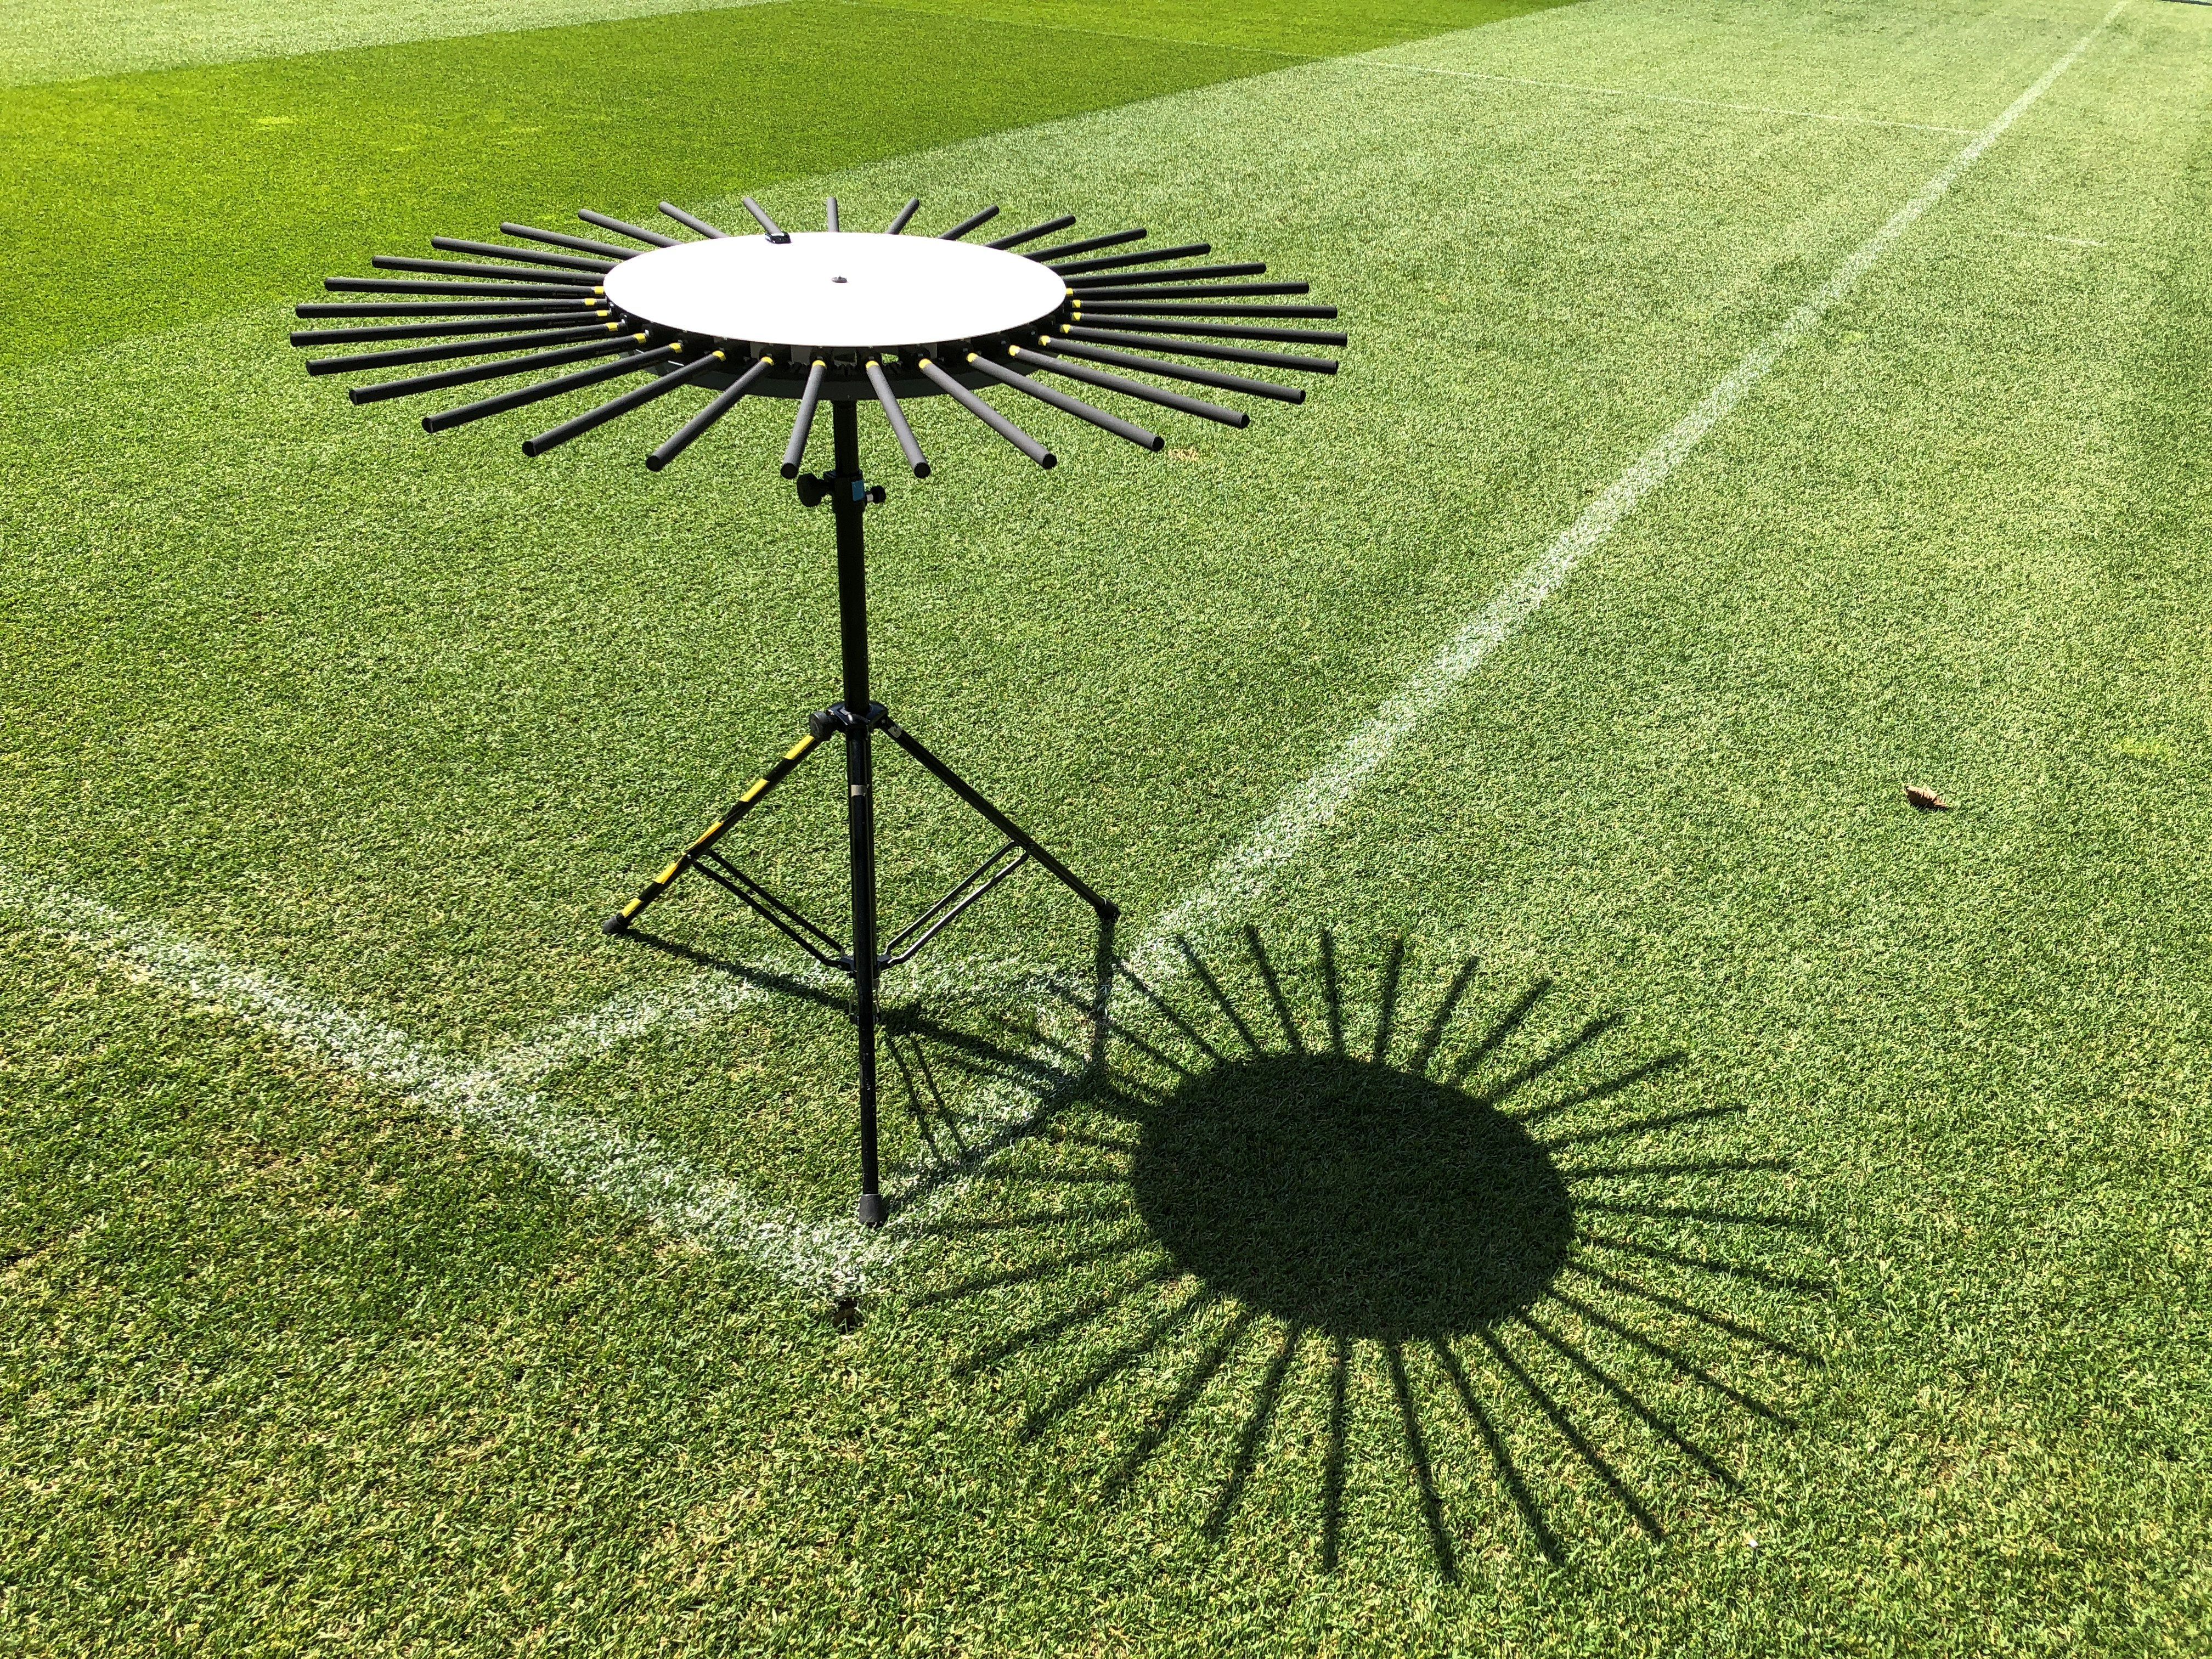 The prototype of an AMBEO Sports Microphone Array for 360° sound will be on display at the Sennheiser and Neumann NAB booth (C1307)